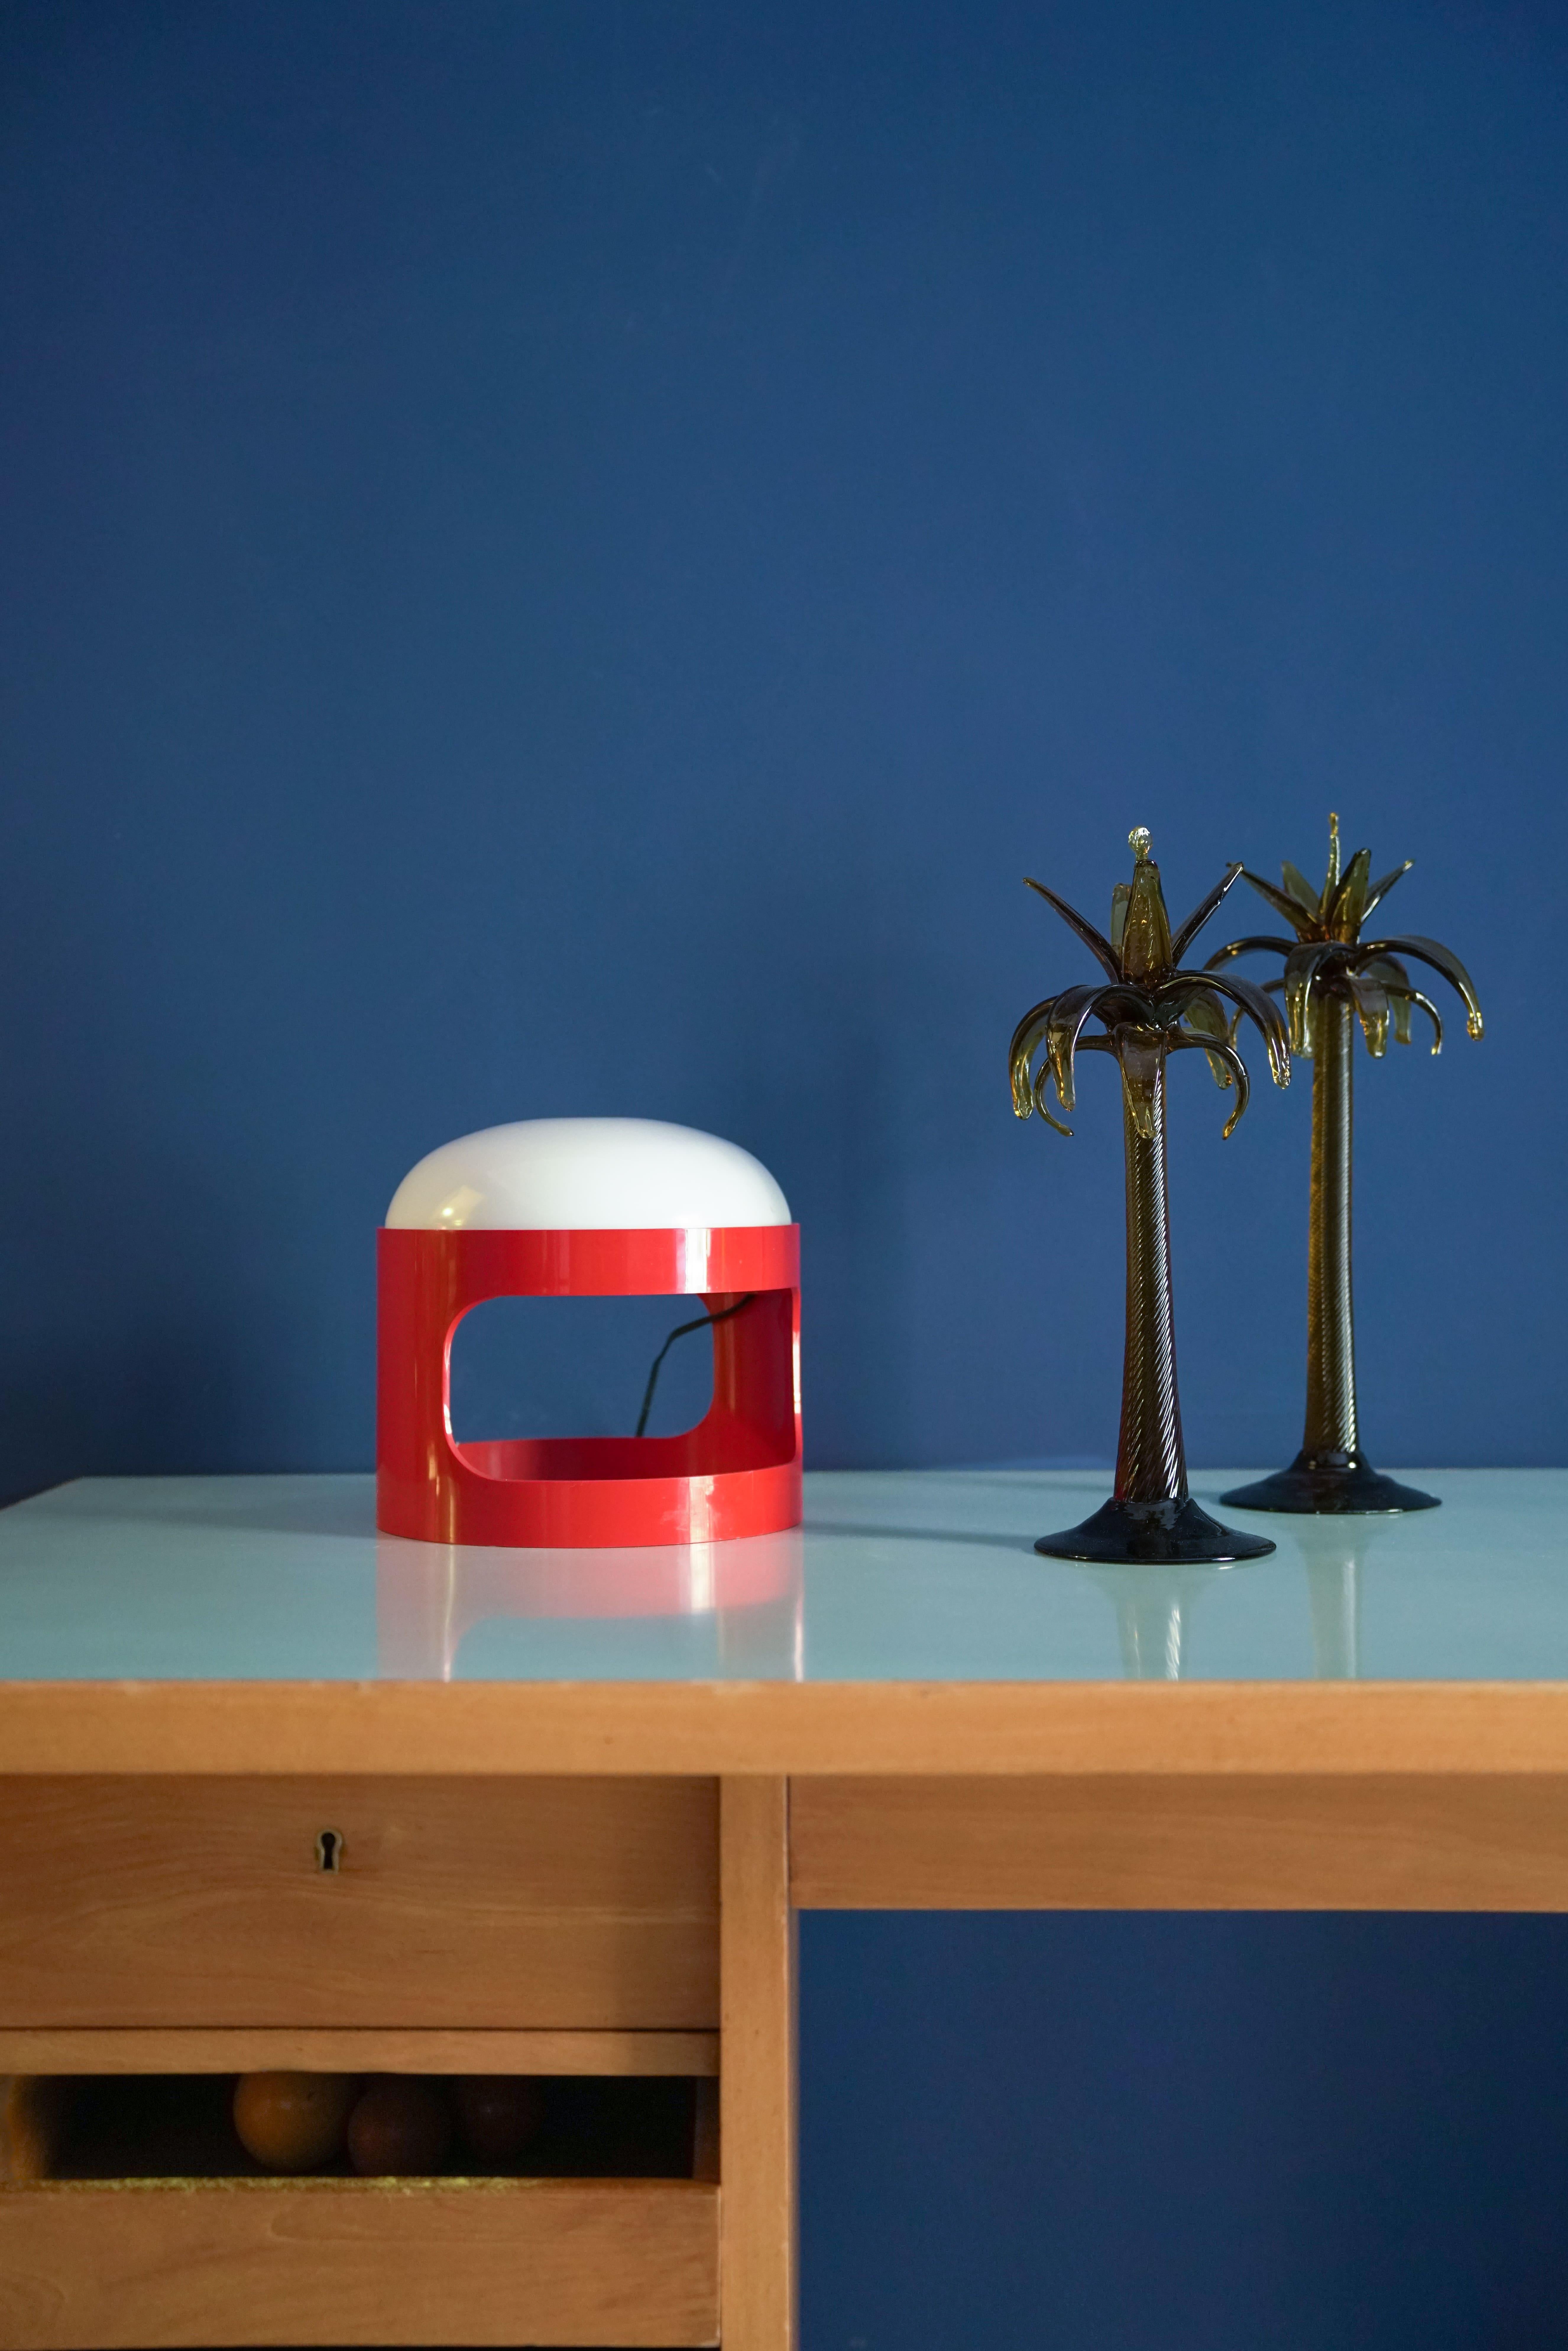 The KD 28 lamp, designed by renowned Italian designer Joe Colombo for Italian lighting manufacturer Kartell, debuted in 1967 in a bold red shade. Its ABS plastic body envelops a luminous sphere composed of two methacrylate parts, highlighting an